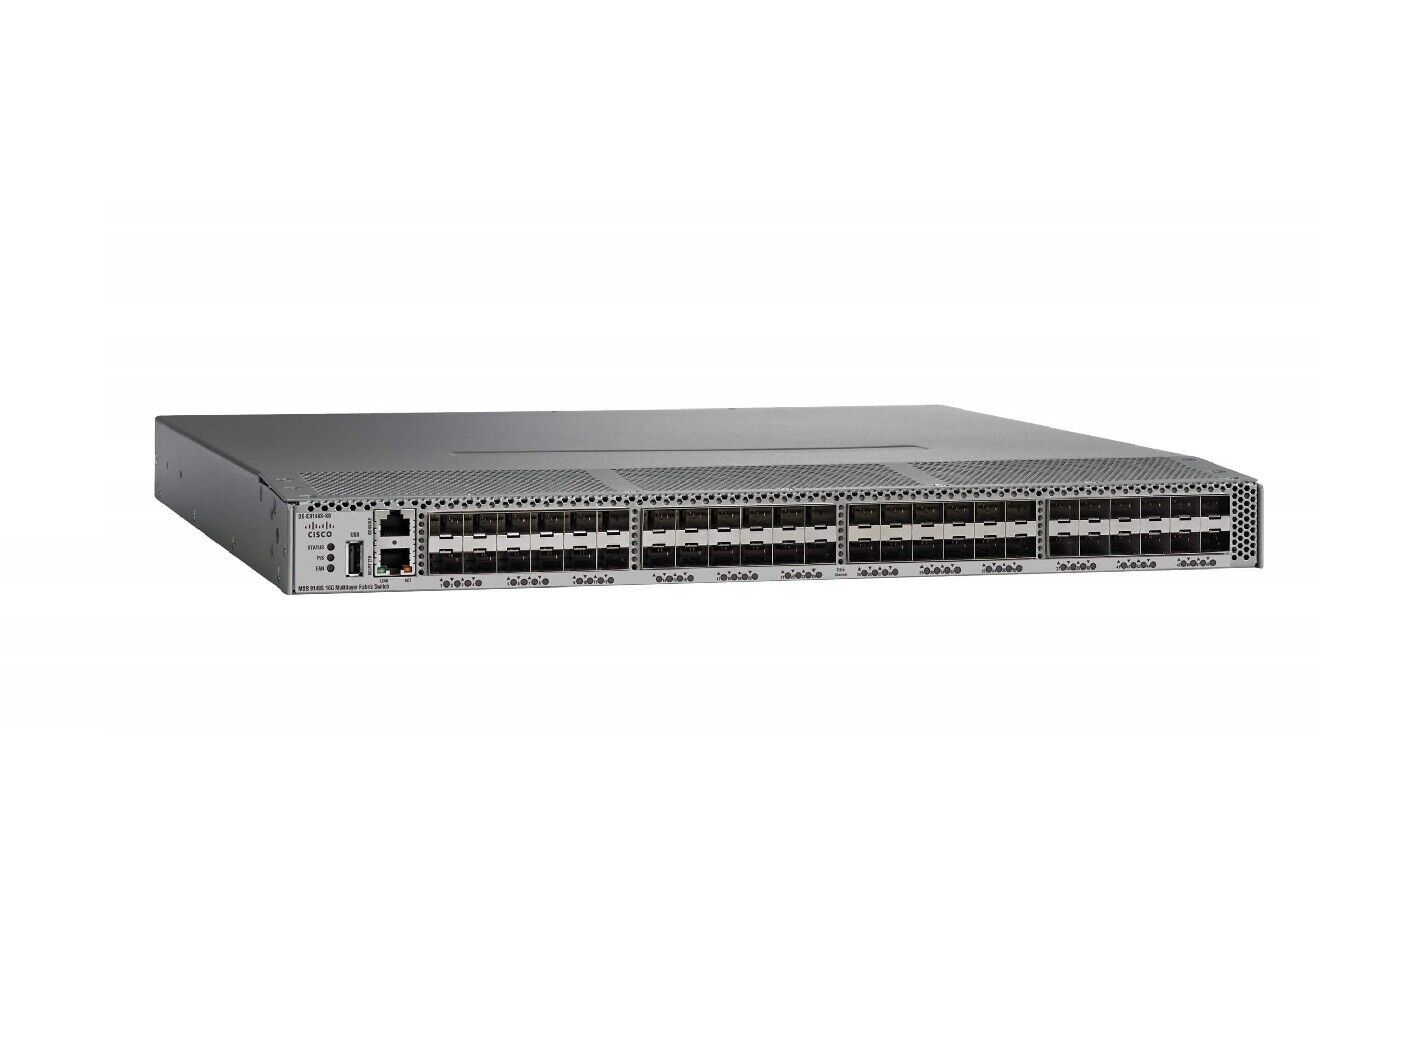 Cisco DS-C9148S-K9 MDS 9148S 16G Multilayer Fabric Switch 12 Active 1YearWaranty